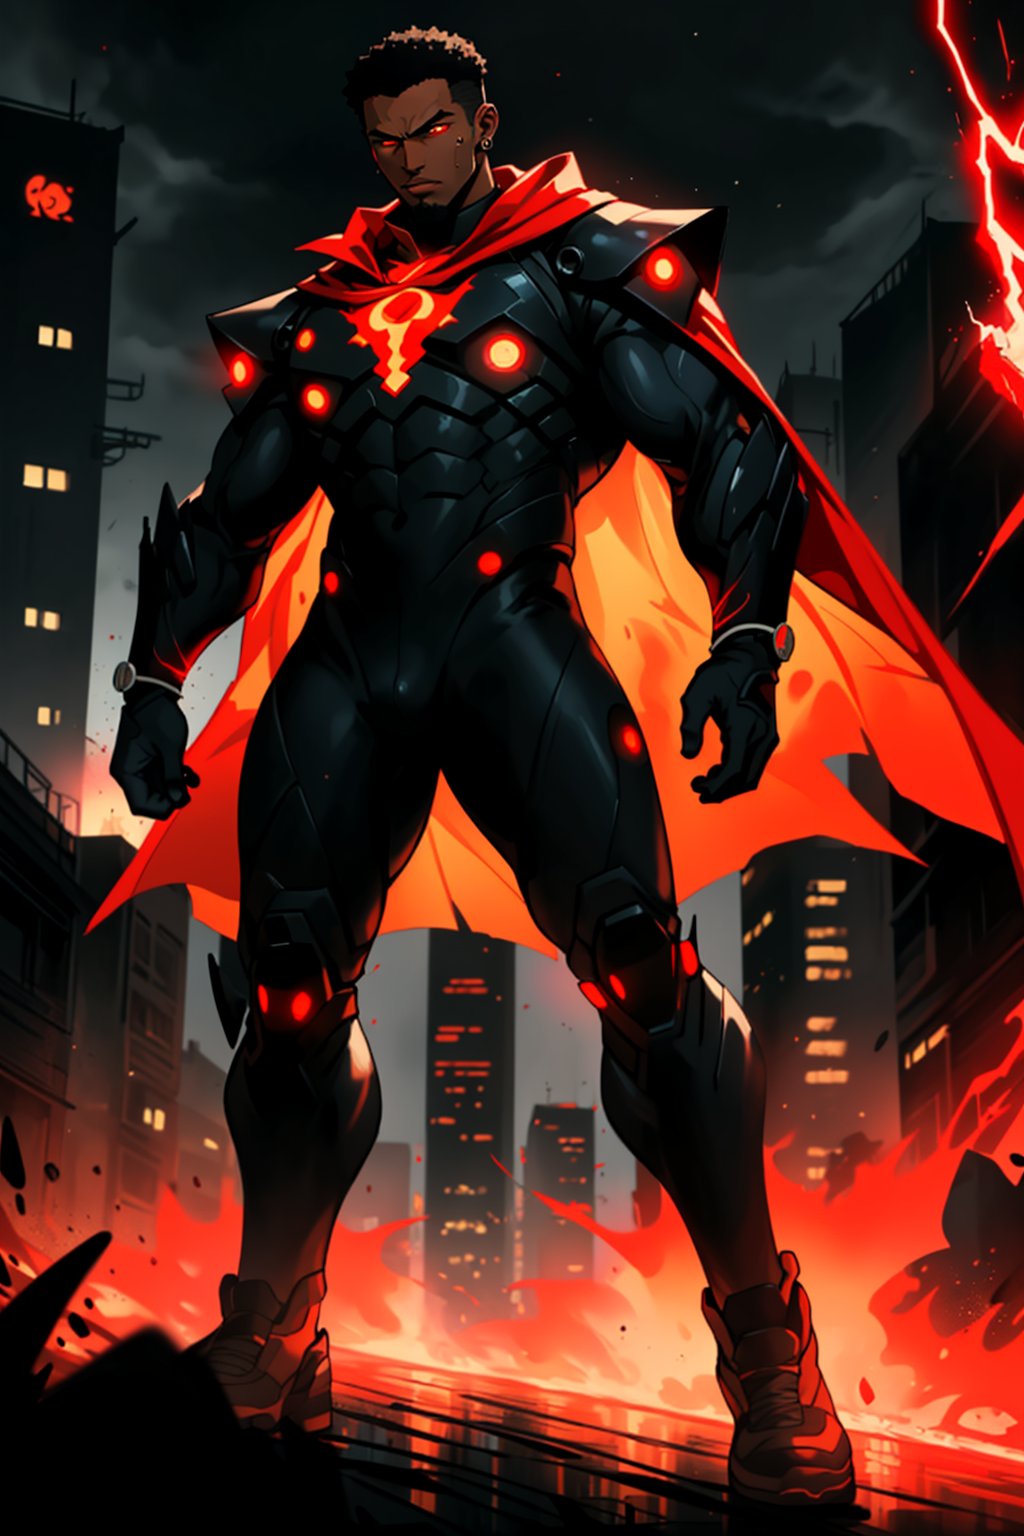 In a dimly lit, urban landscape, a full body shot of a powerful black male figure emerges. The subject wears a full-body skin tight black battle suit adorned with crimson glowing lines, accentuating their physique. Orange glowing eyes pierce through the darkness, radiating intensity. A flowing red cape billows behind them, as if driven by an unseen force. Dark-skinned and imposing, they embody the essence of Nyantcha style, Arbiterman's masterpiece, while LiLBabyR7der's brushstrokes bring forth a sense of dynamic energy.,LiLBabyR7der